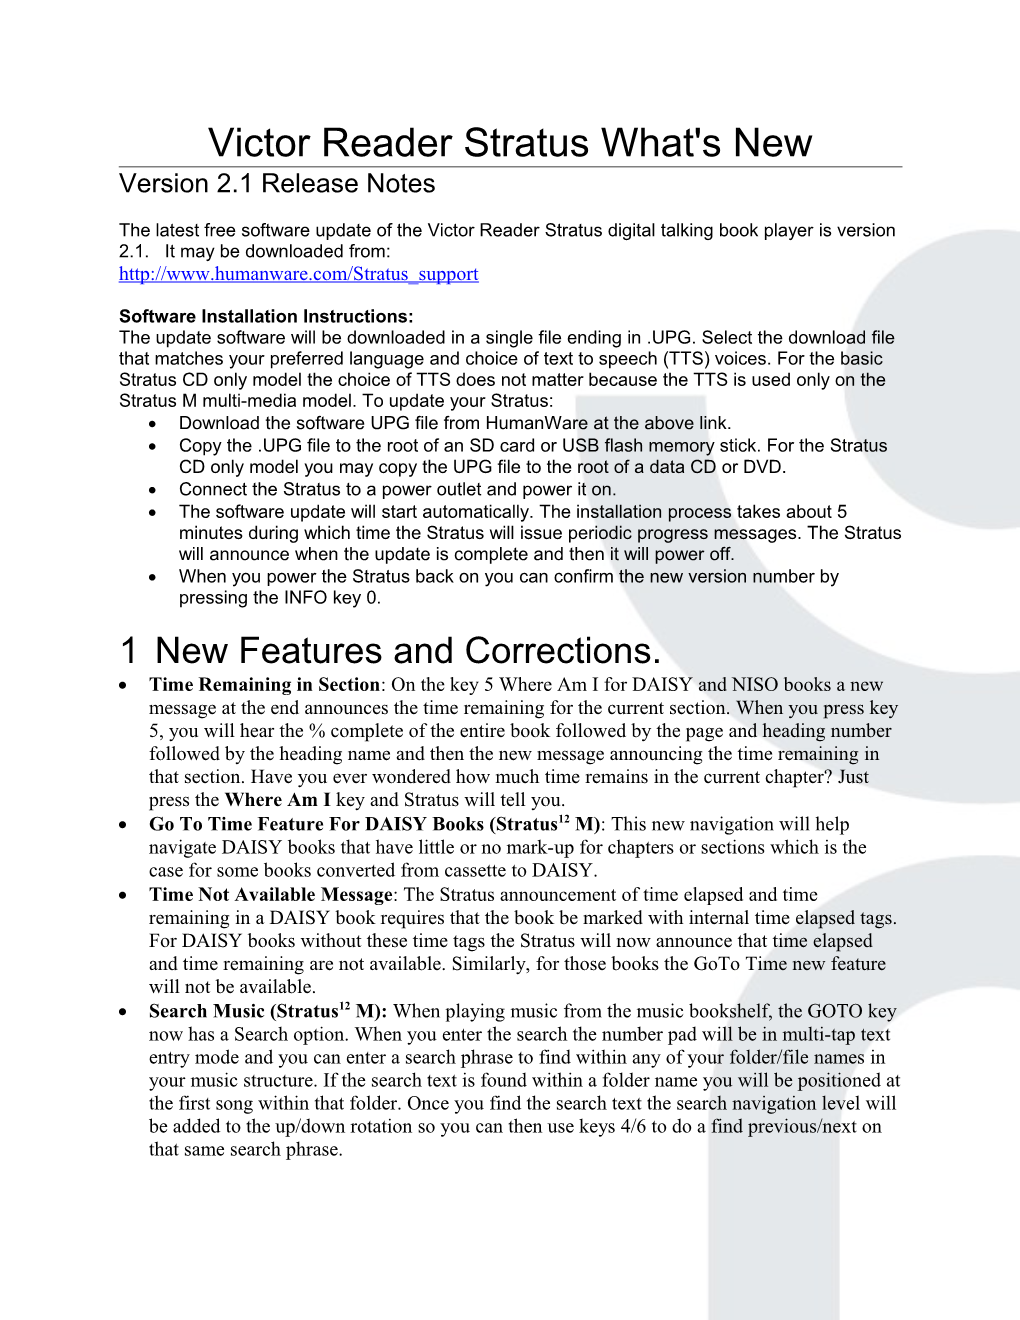 Victor Reader Stratus Version 2.1 What's New